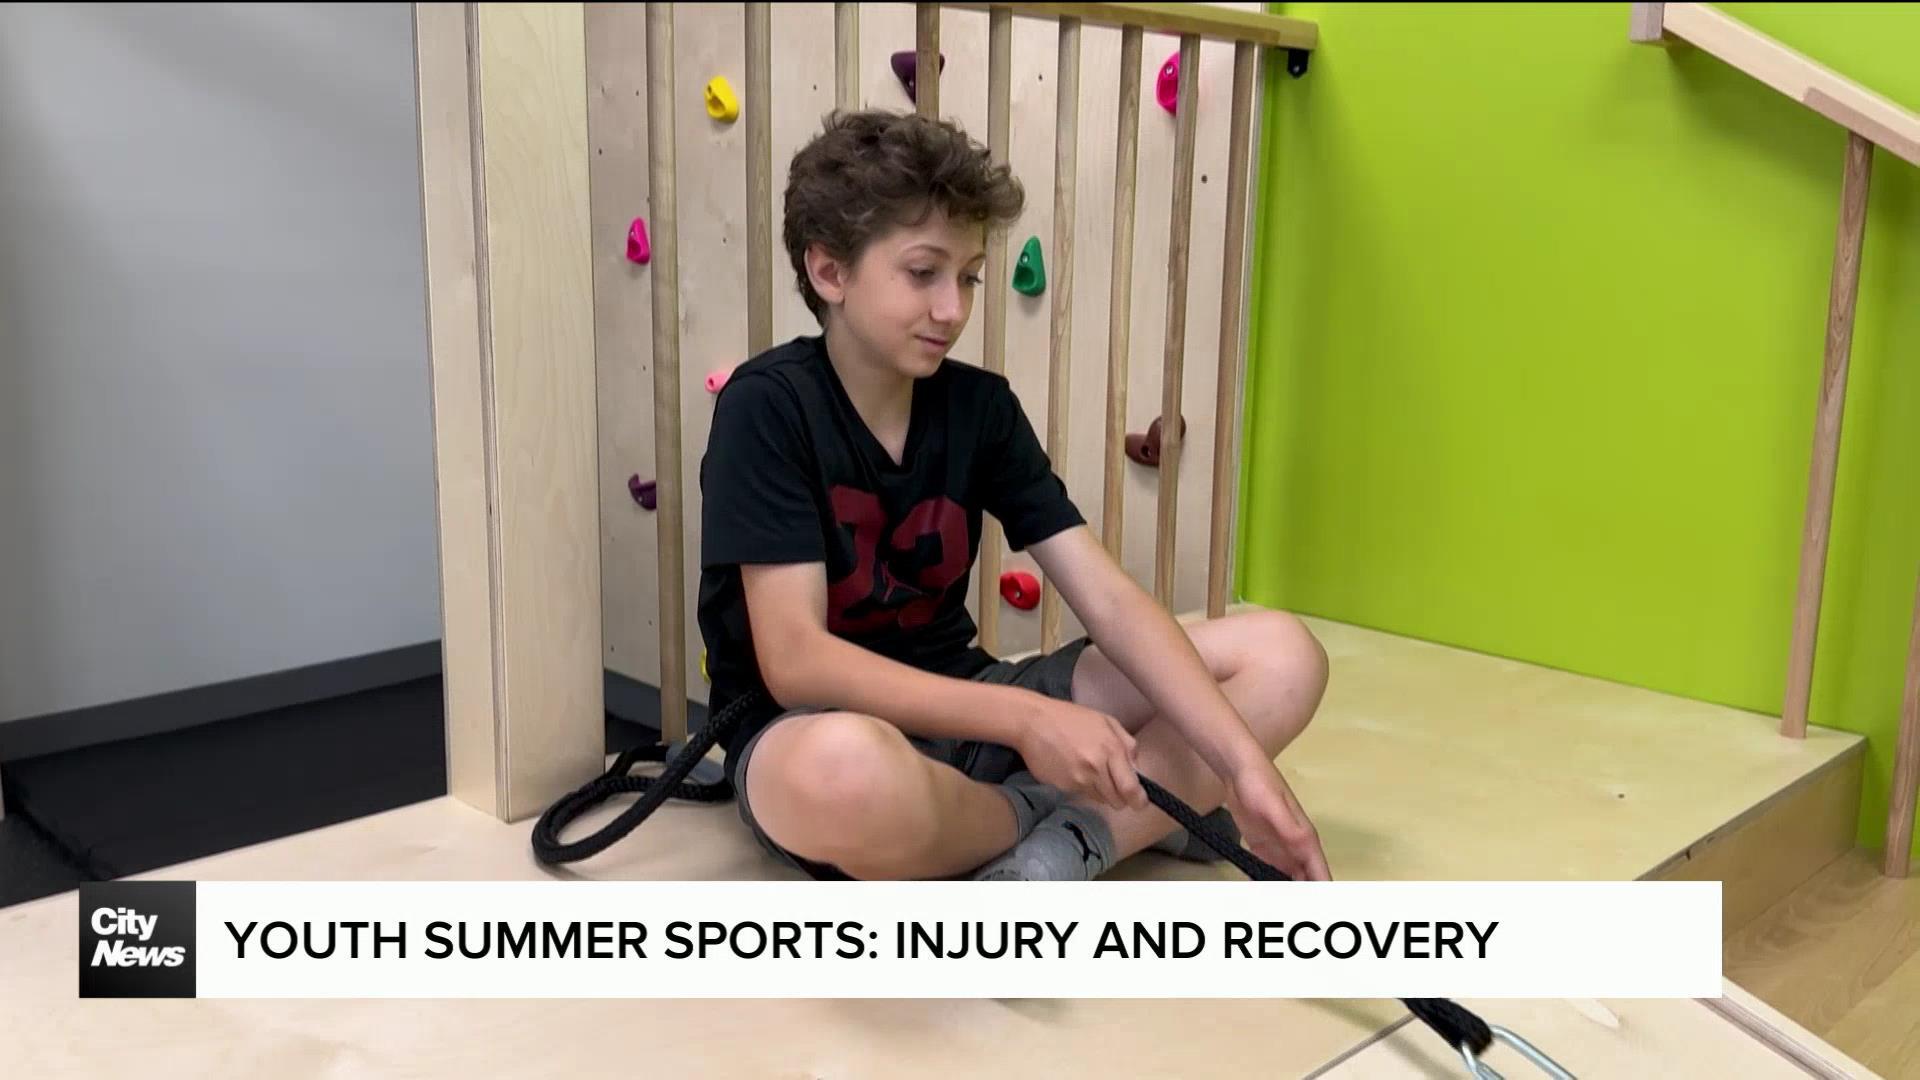 Recovering from youth summer sport injuries like an adult